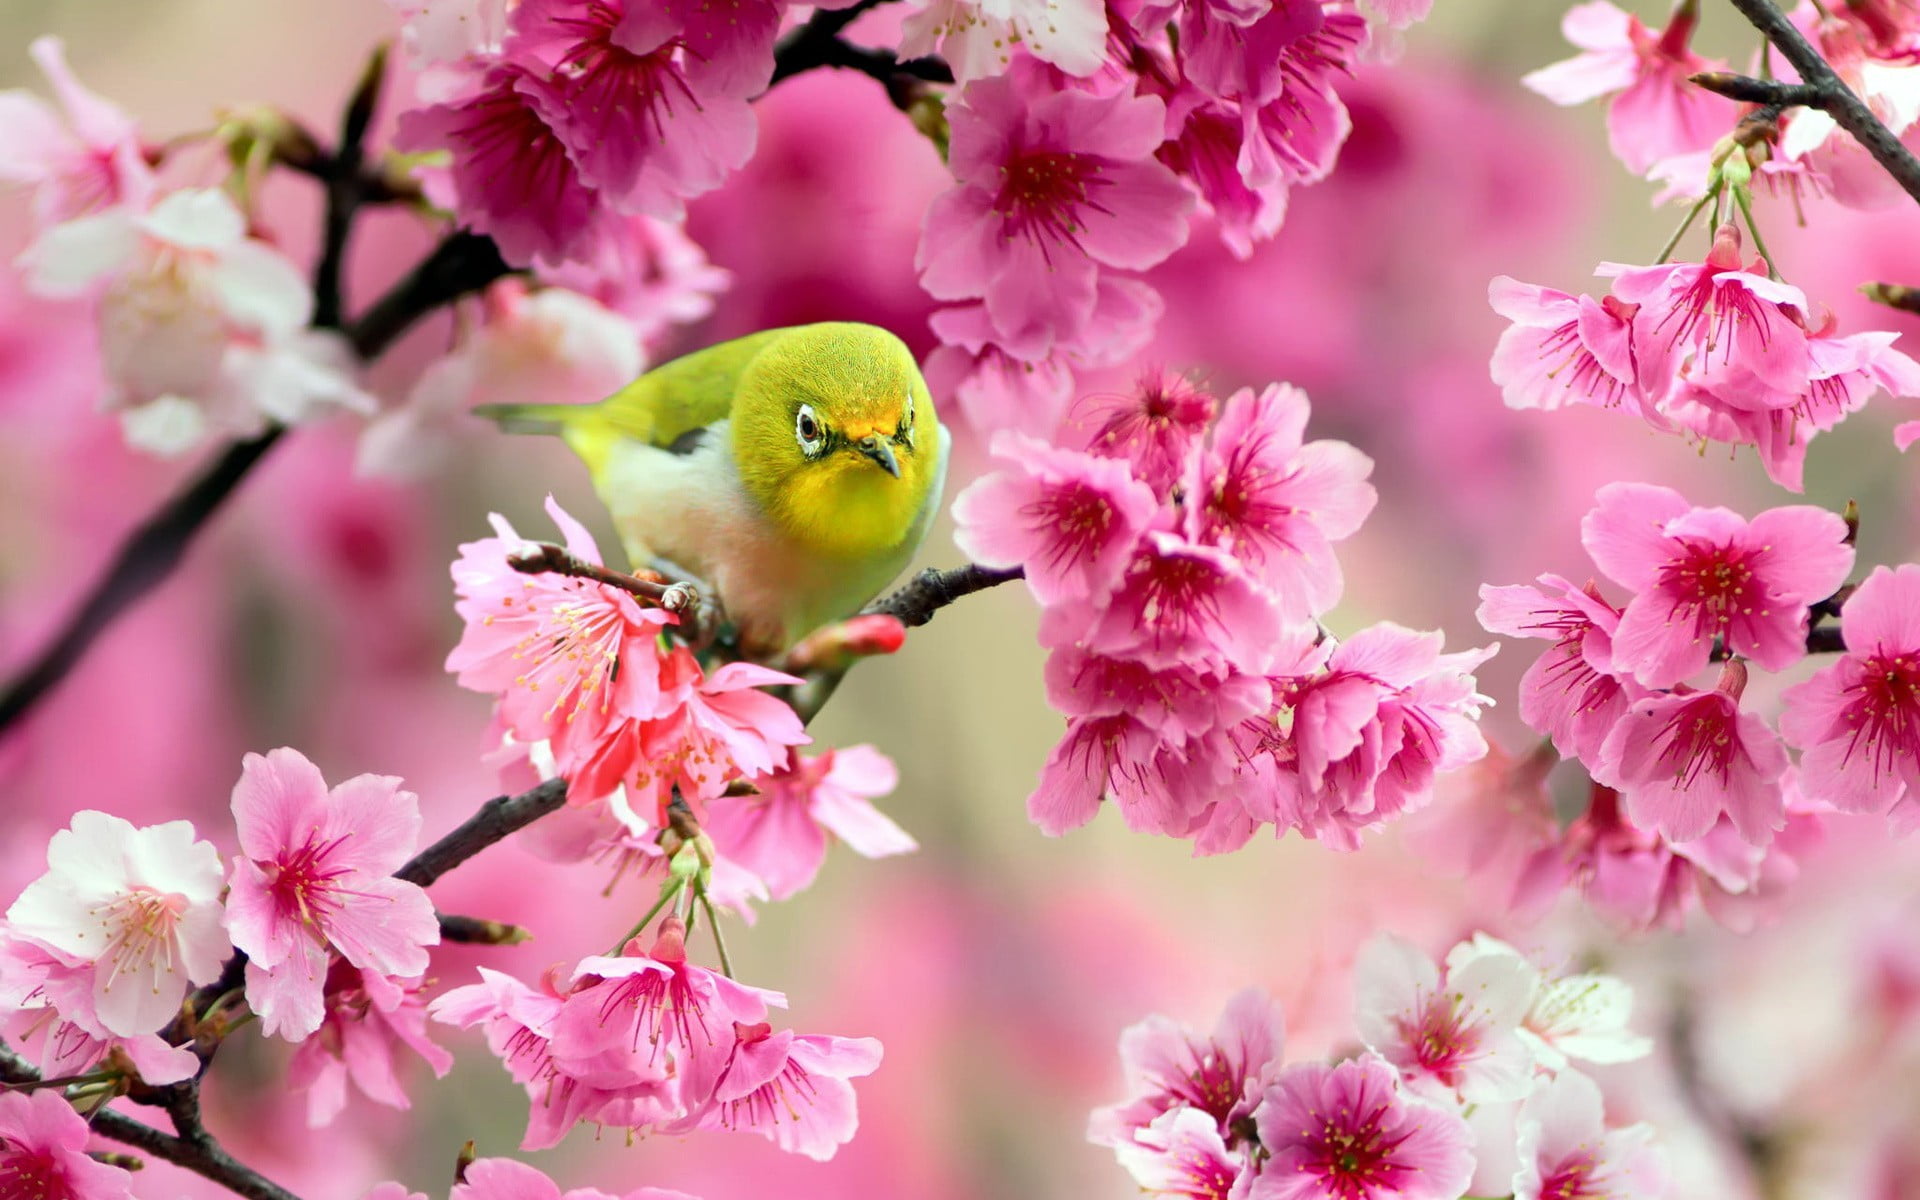 green and white bird, birds, animals, pink flowers, blossoms